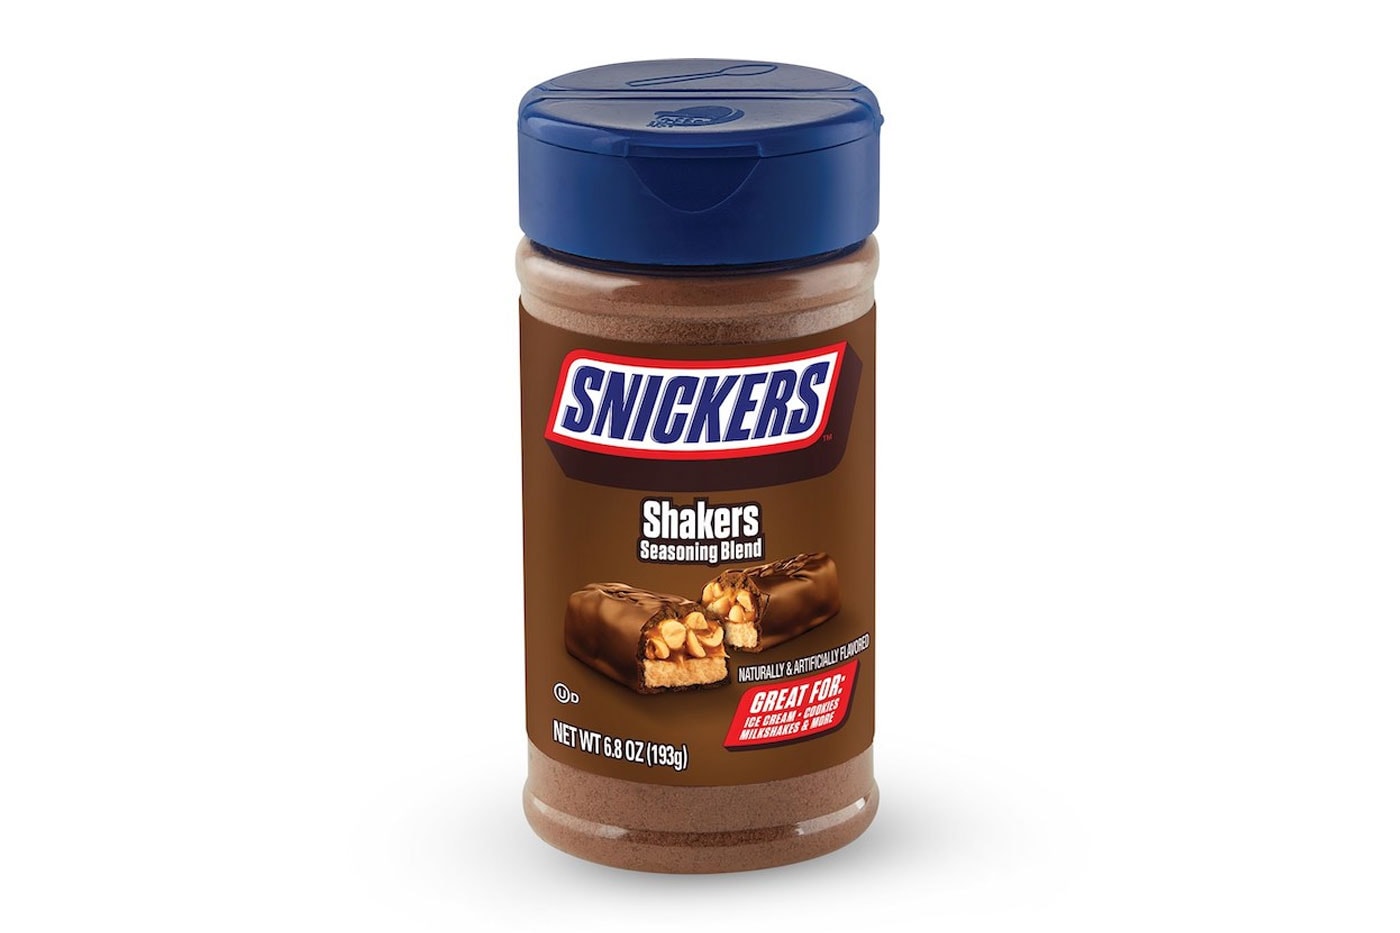 B&G TWIX Shakers Seasoning Blend Review: Can You Really Put it on